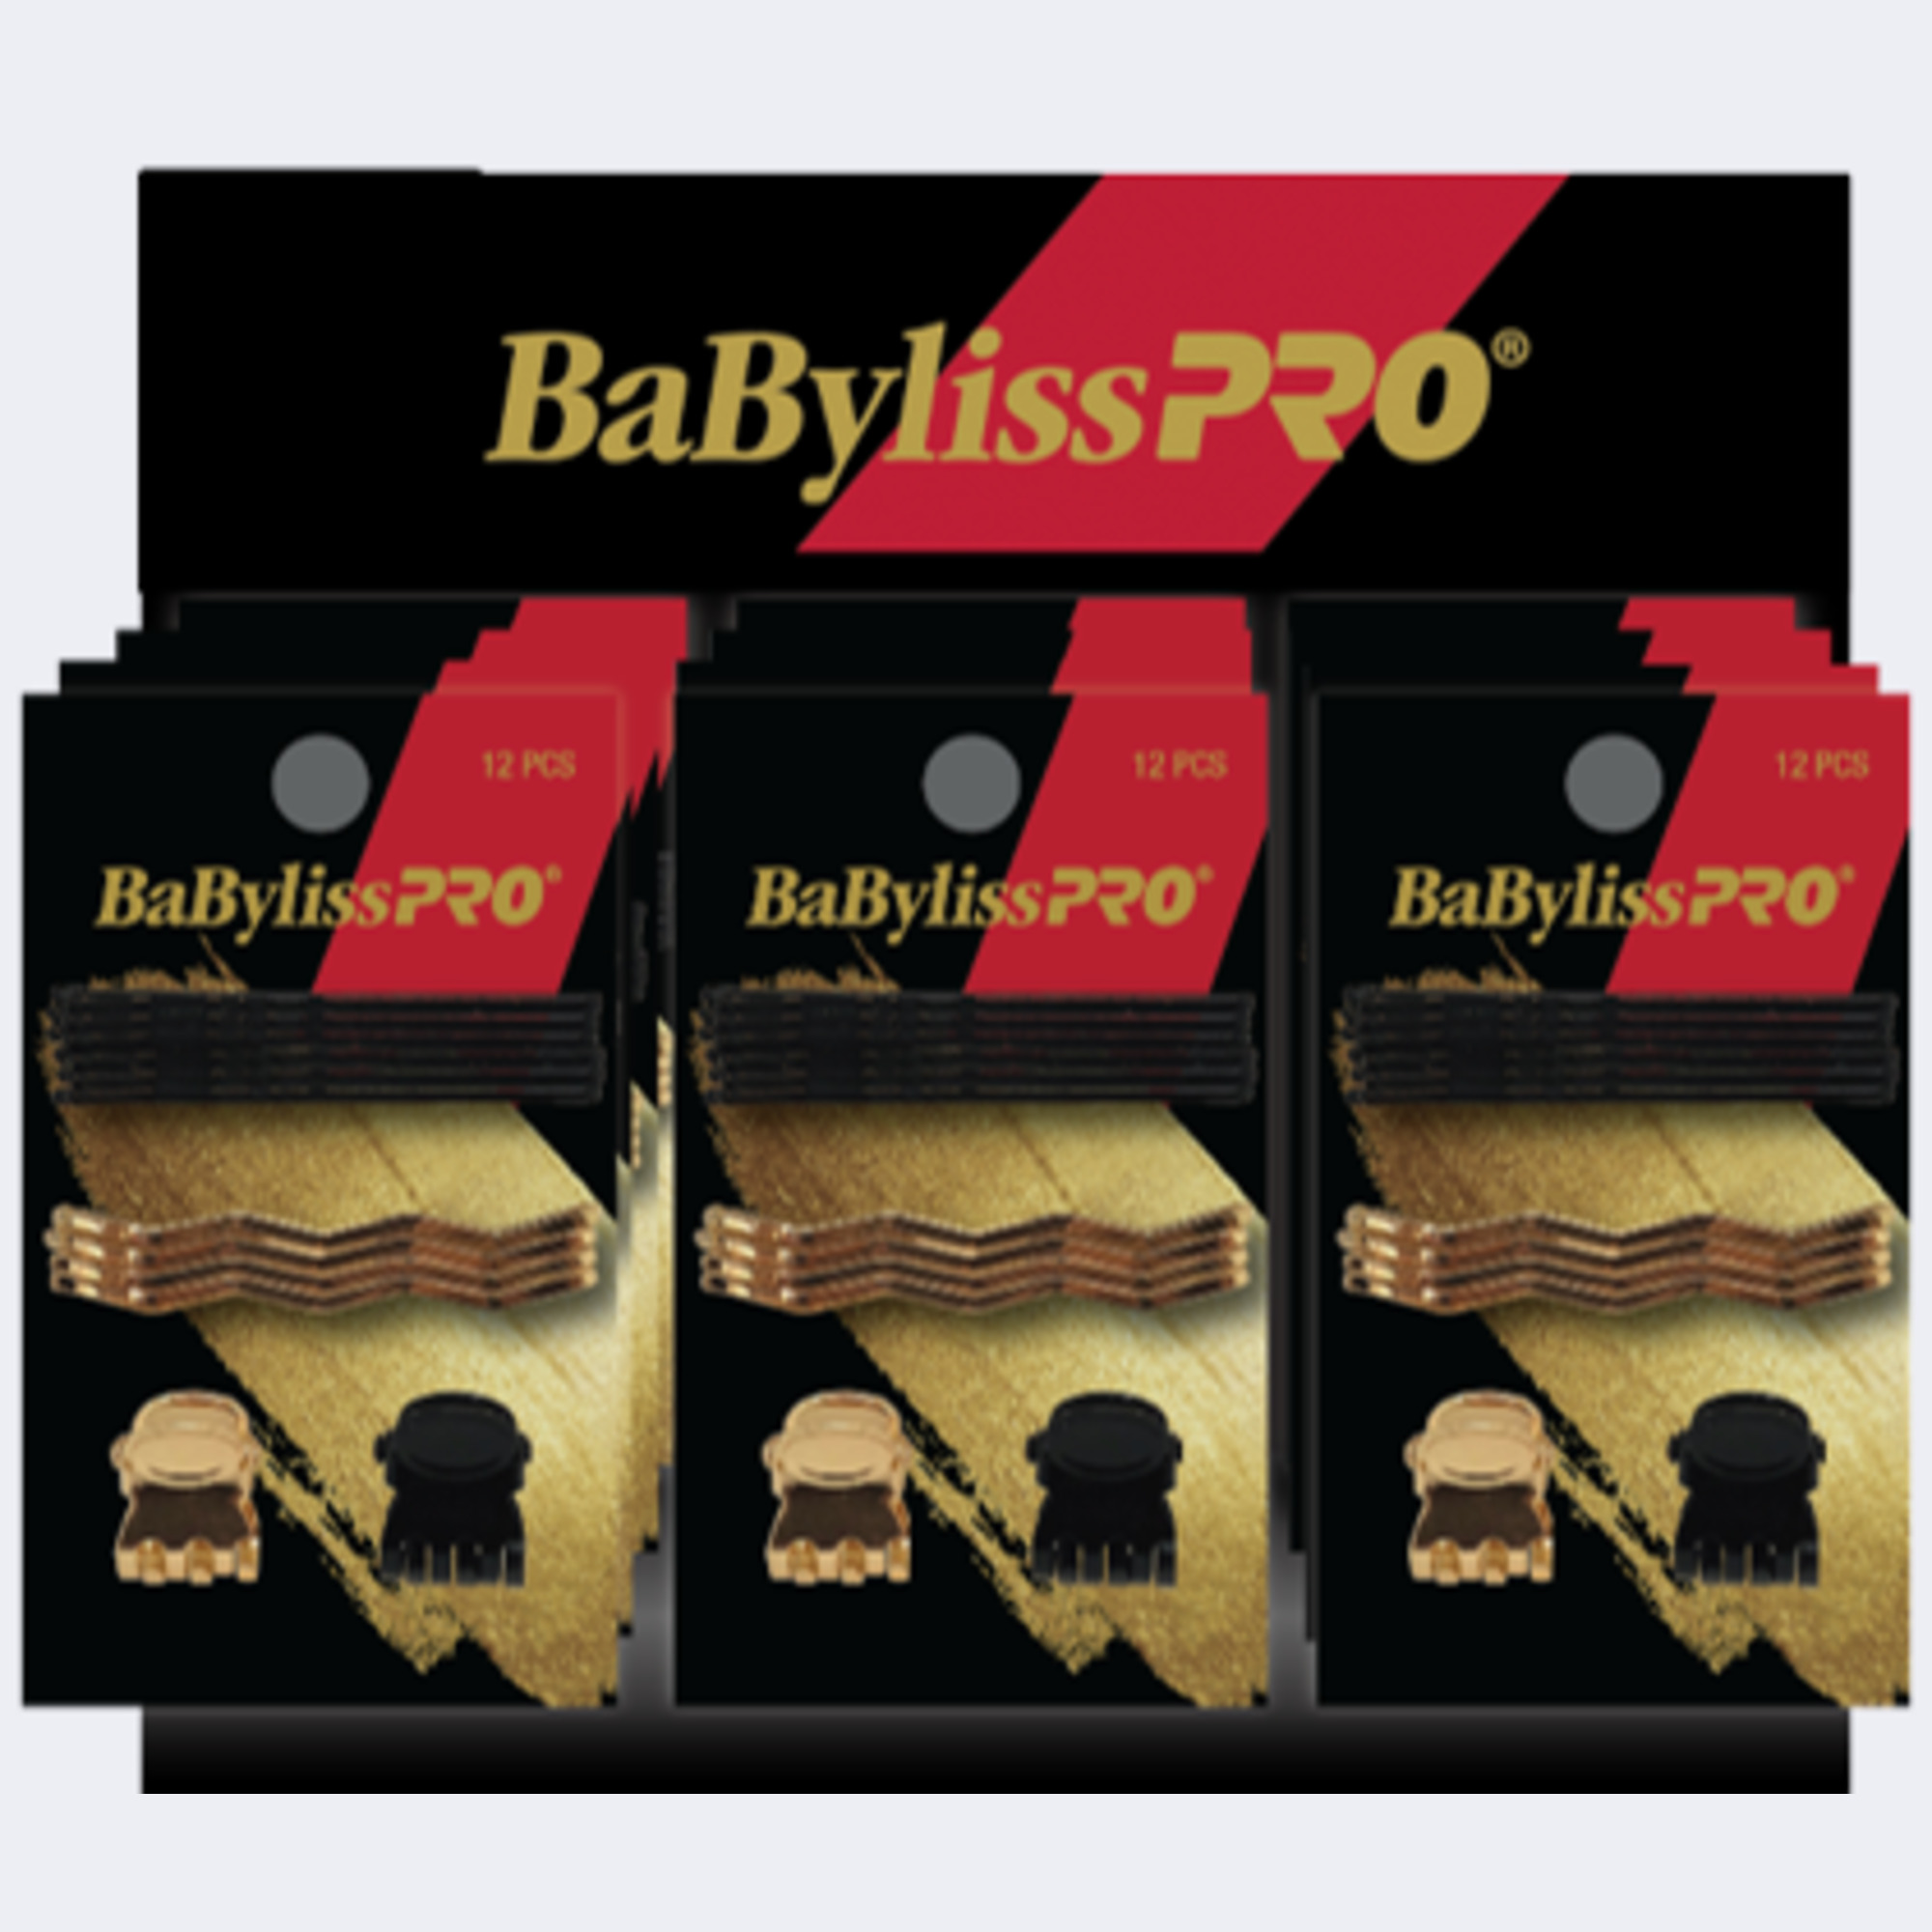 BaBylissPRO ASSORTED HAIR PINS & CLIPS 12pc Display - Click Image to Close